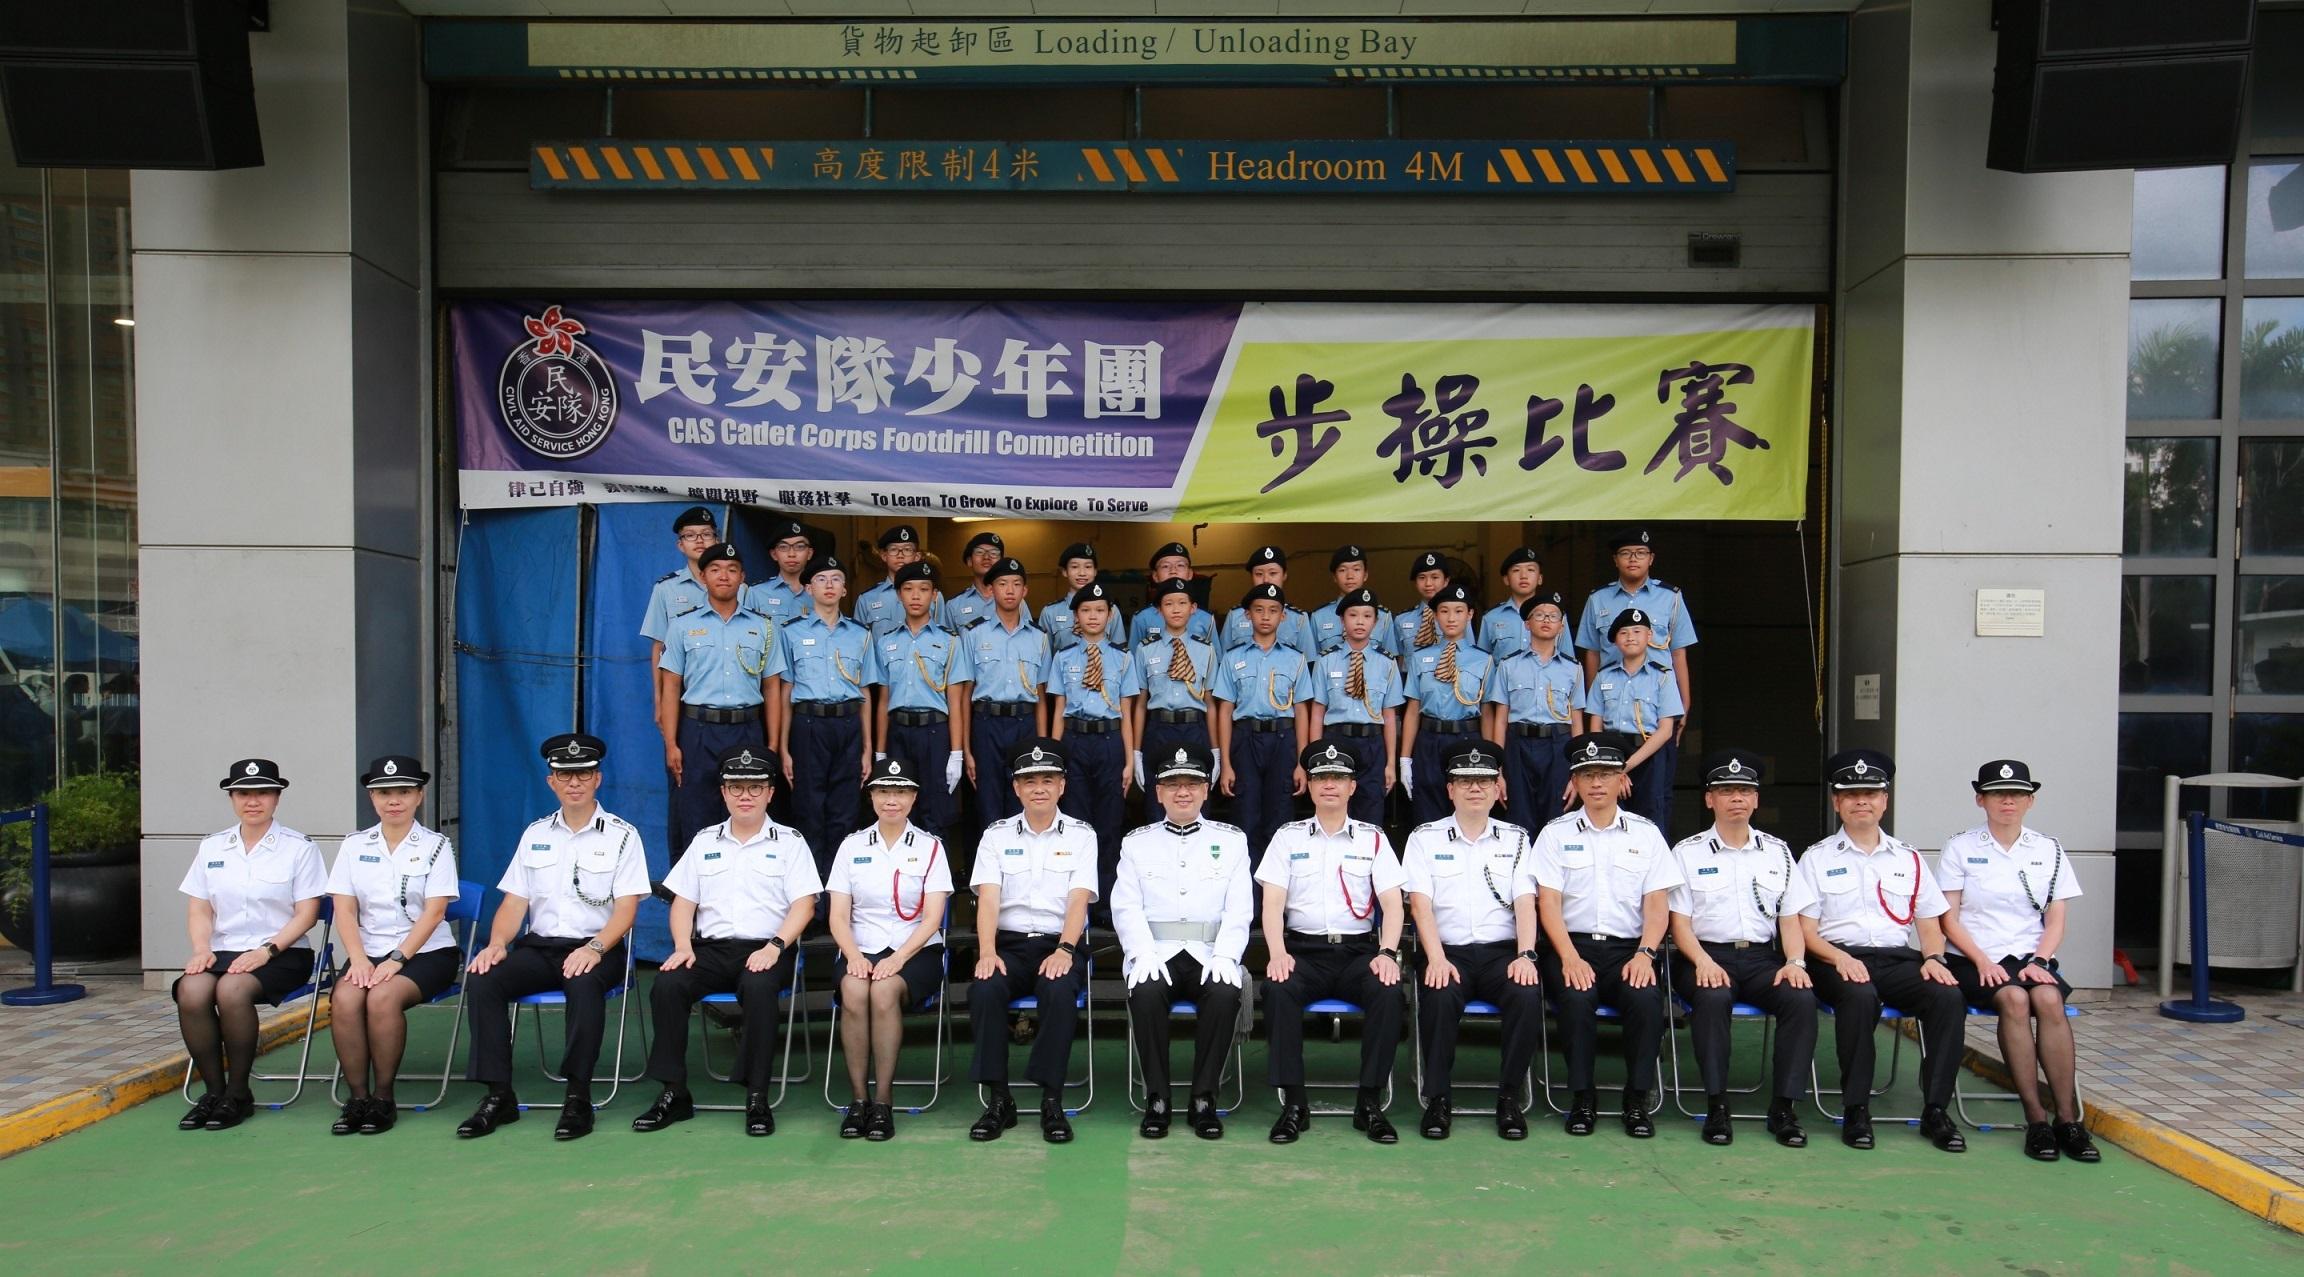 The Civil Aid Service Cadet Corps Foot Drill Competition 2023 was held today (August 27). Photo shows the Acting Director of Immigration, Mr Benson Kwok (first row, centre) with the representatives of the winning team.